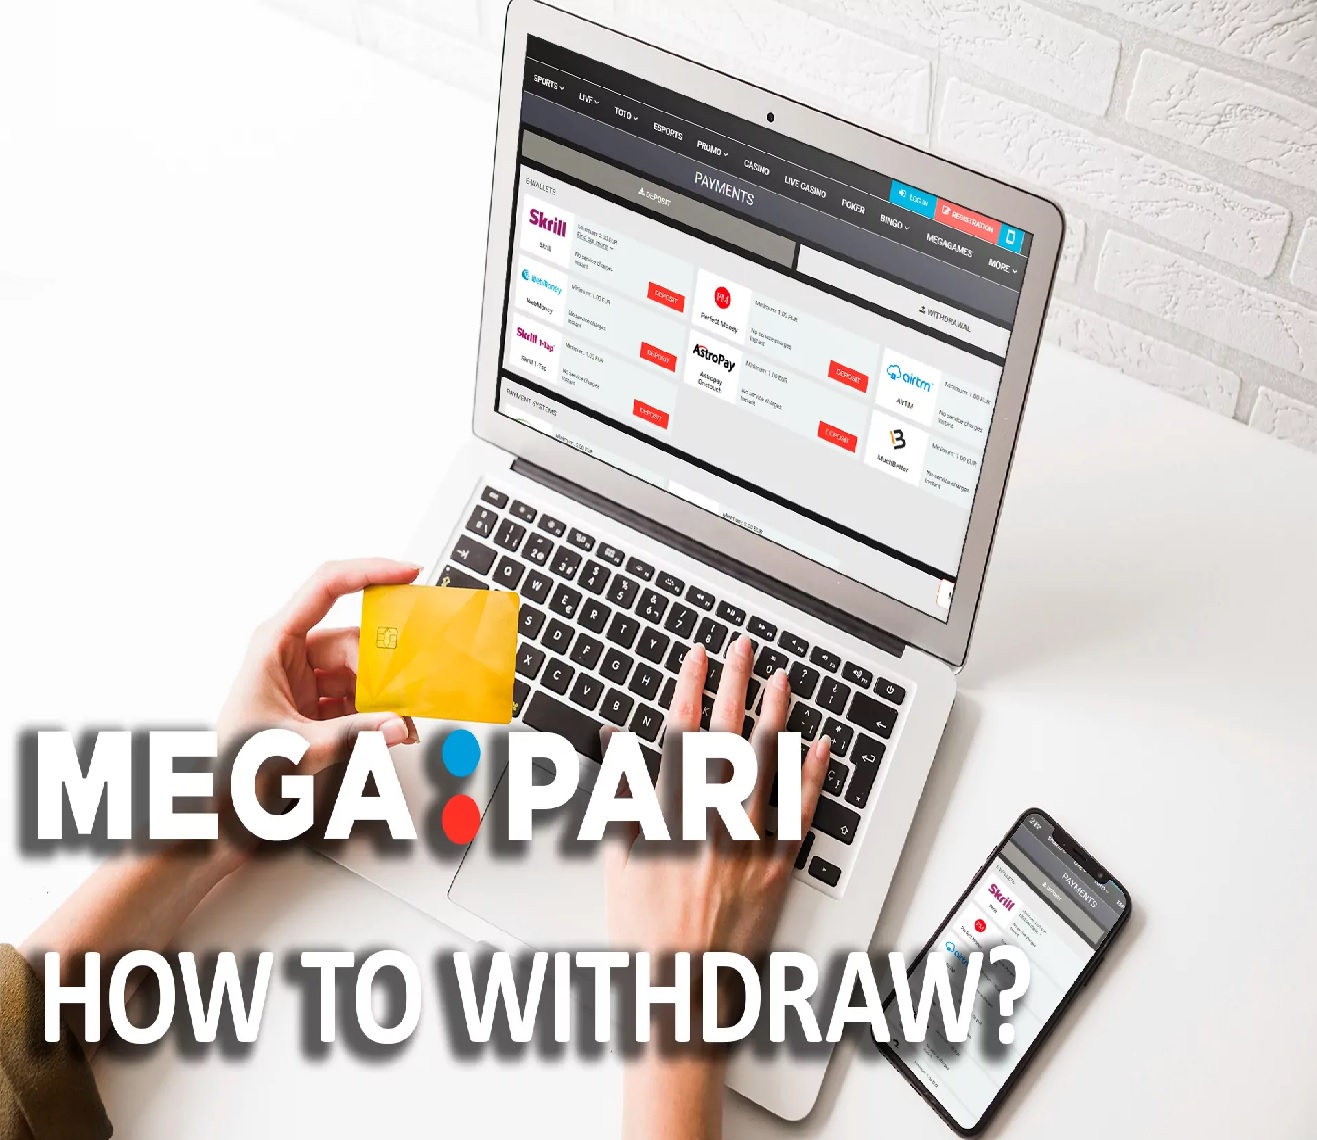 Withdrawal of Funds from Megapari